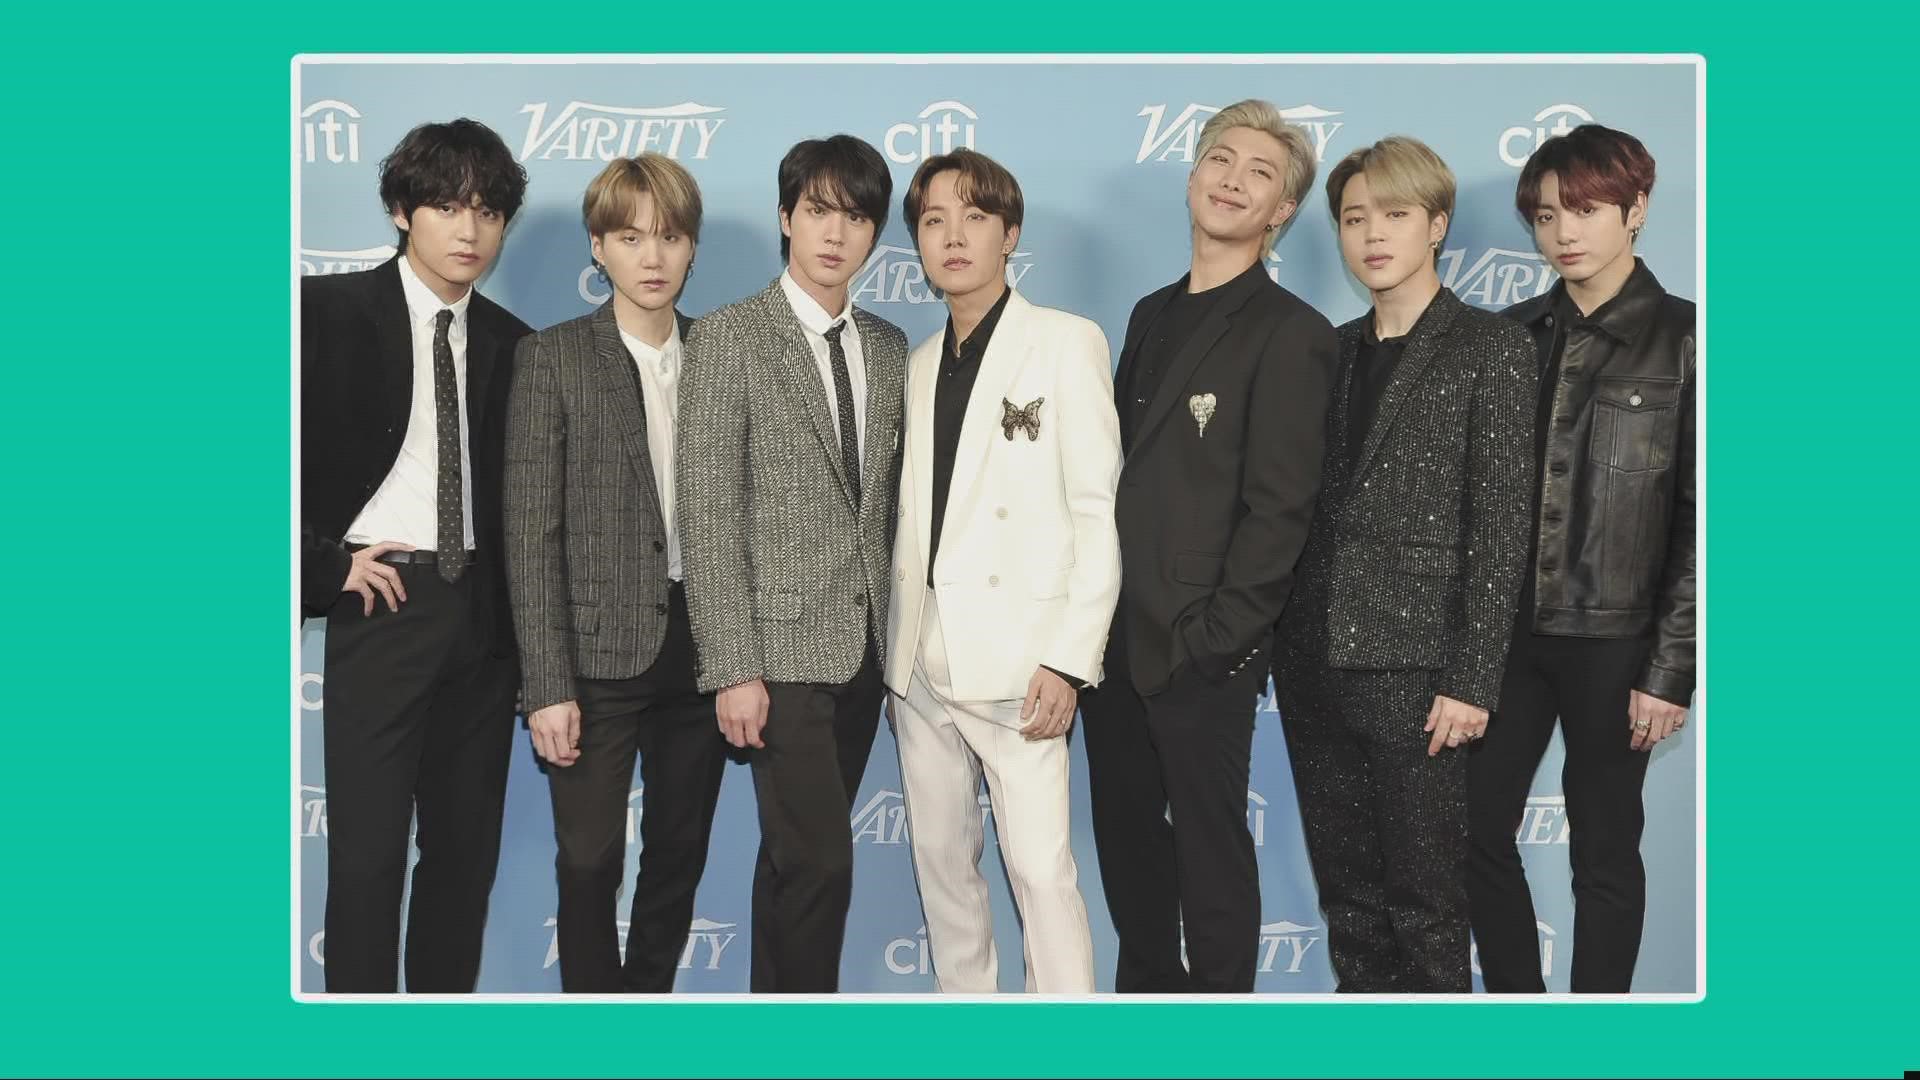 (AP) BTS, the Grammy-nominated South Korean boy band, will join President Joe Biden next week to talk about “Asian inclusion and representation."